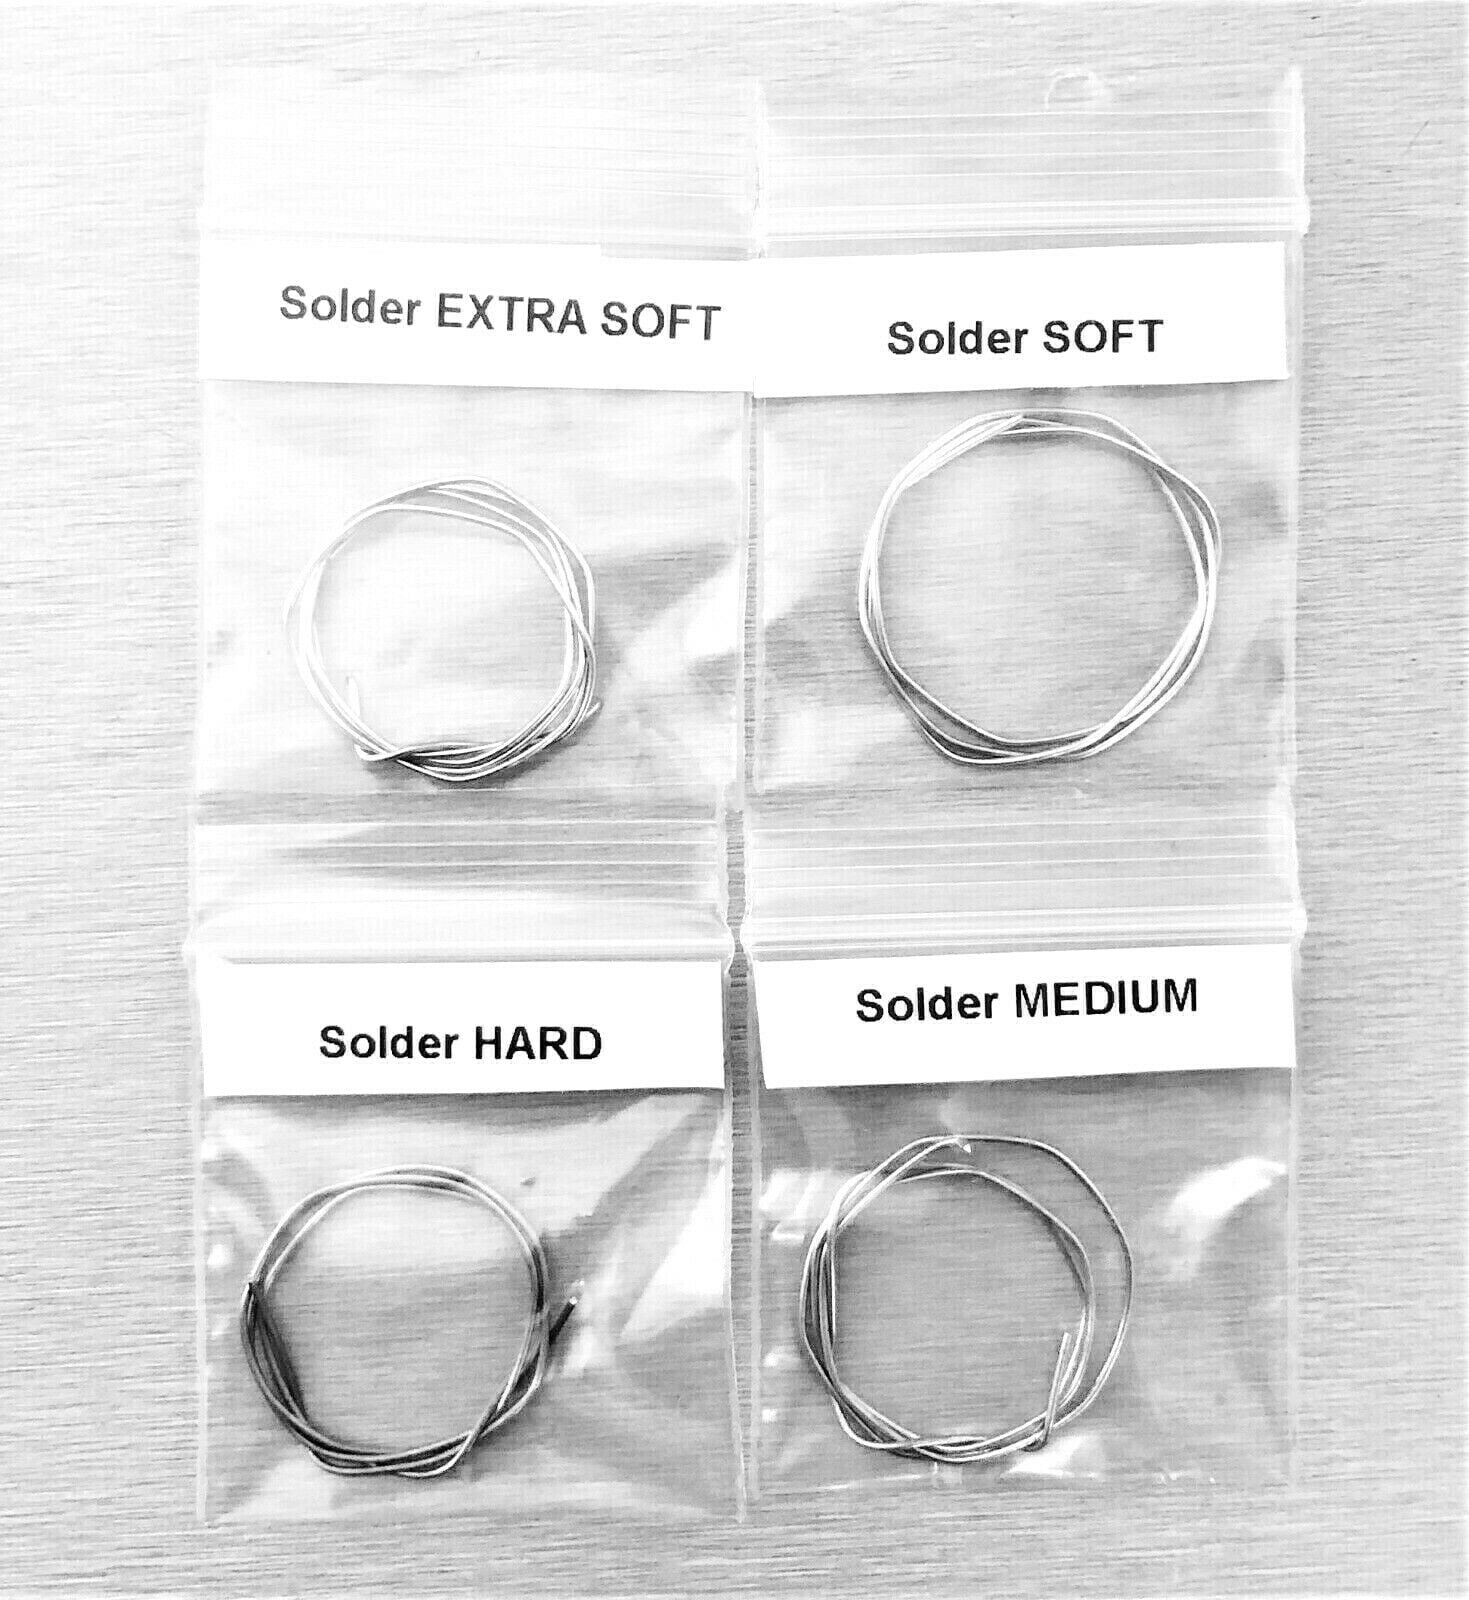 4 Pieces Silver Solder Sheet Assorted Pack 1Dwt @ X-Soft, Easy